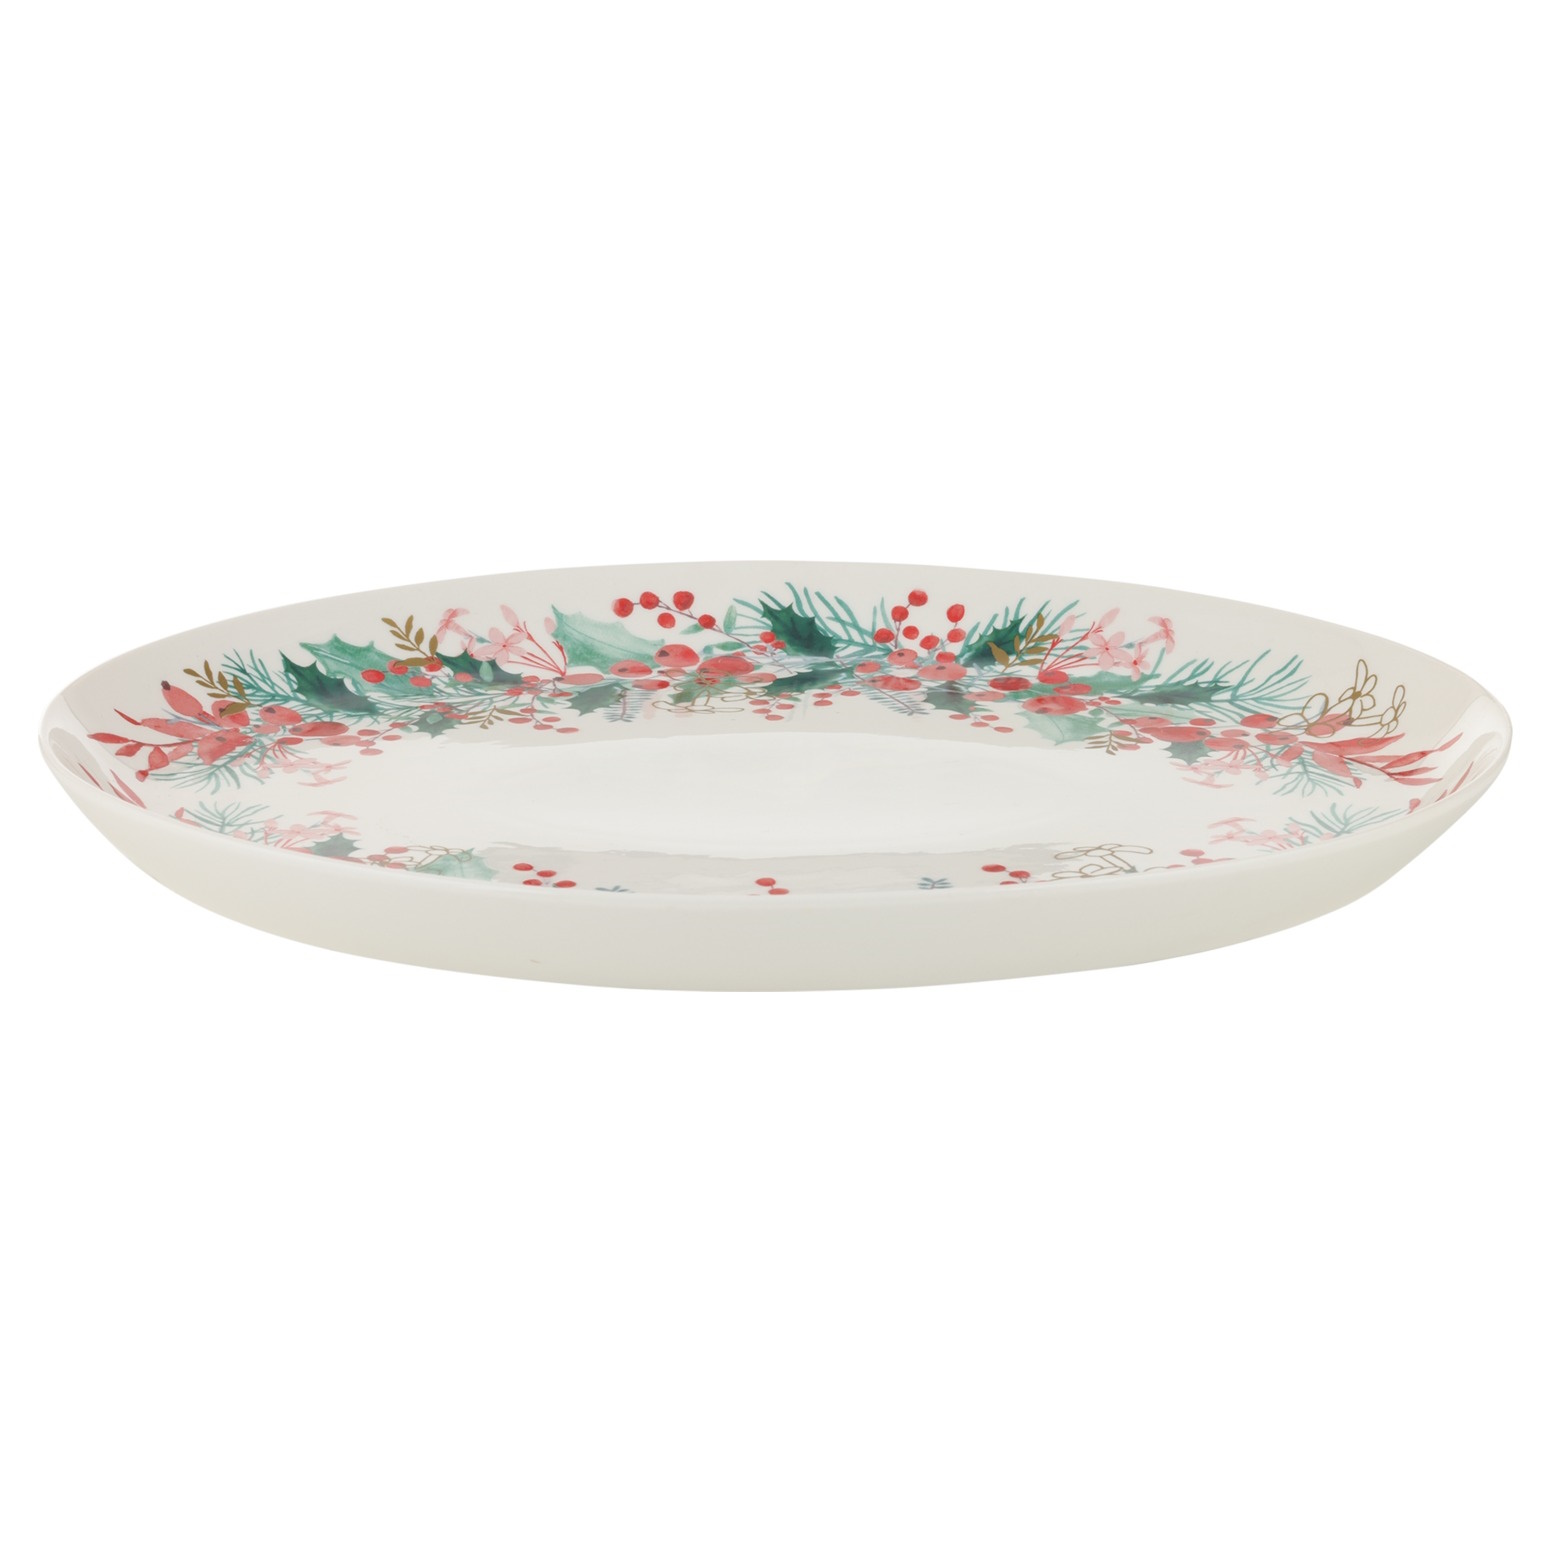 Maxwell & Williams Merry Berry Oval Platter 38x30cm Gift Boxed